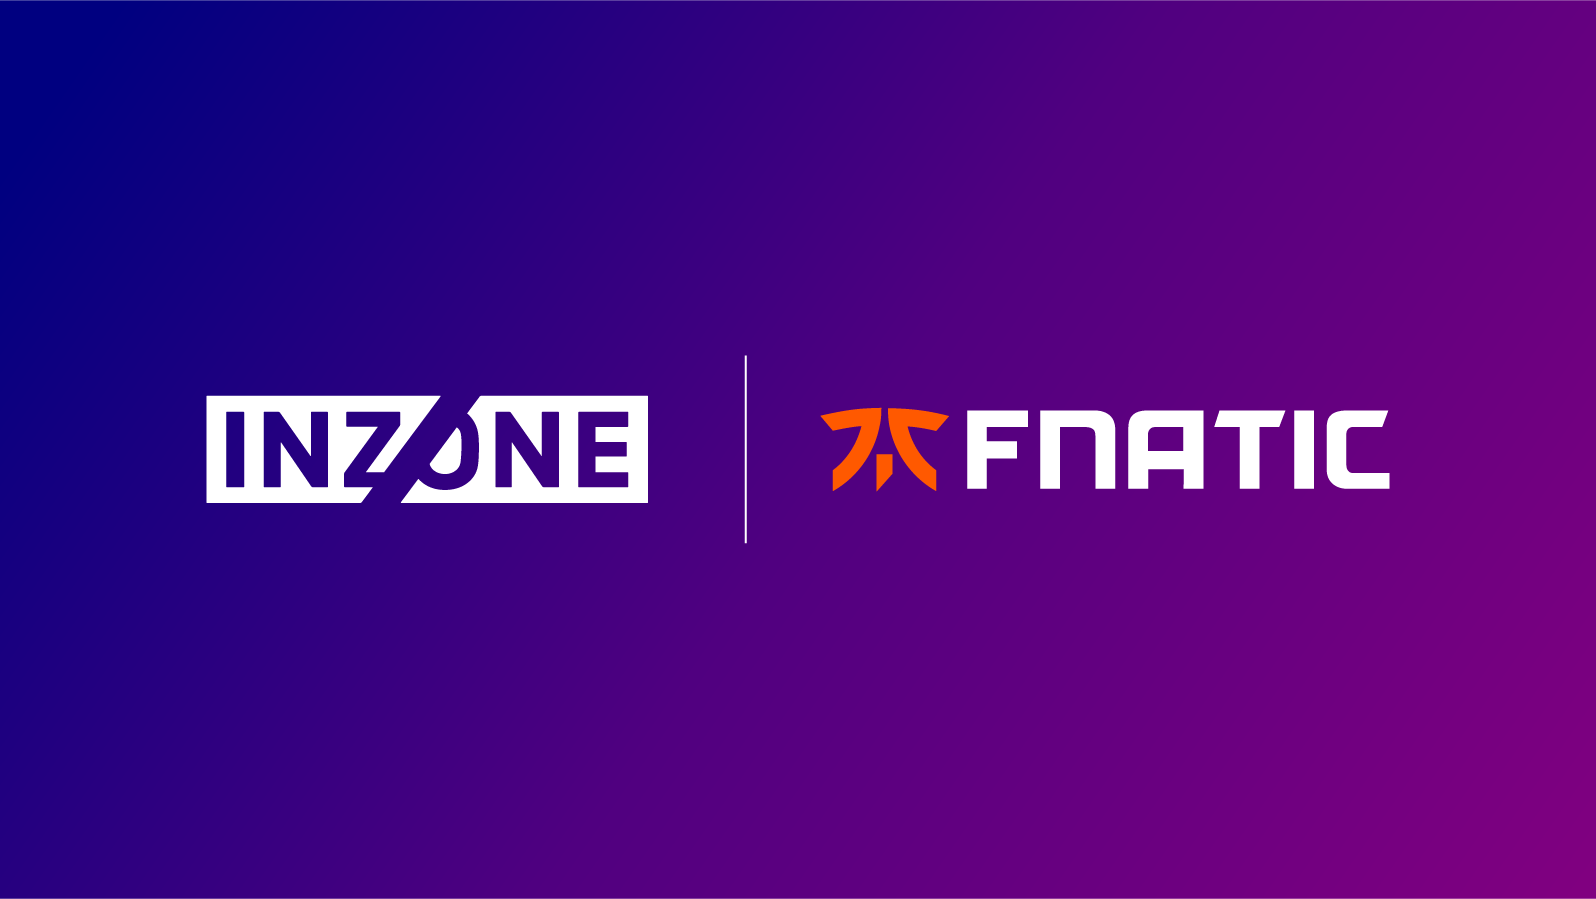 Sony Signs Multi-Year Deal With Fnatic To Design Future INZONE Products & Collaborate On Esports